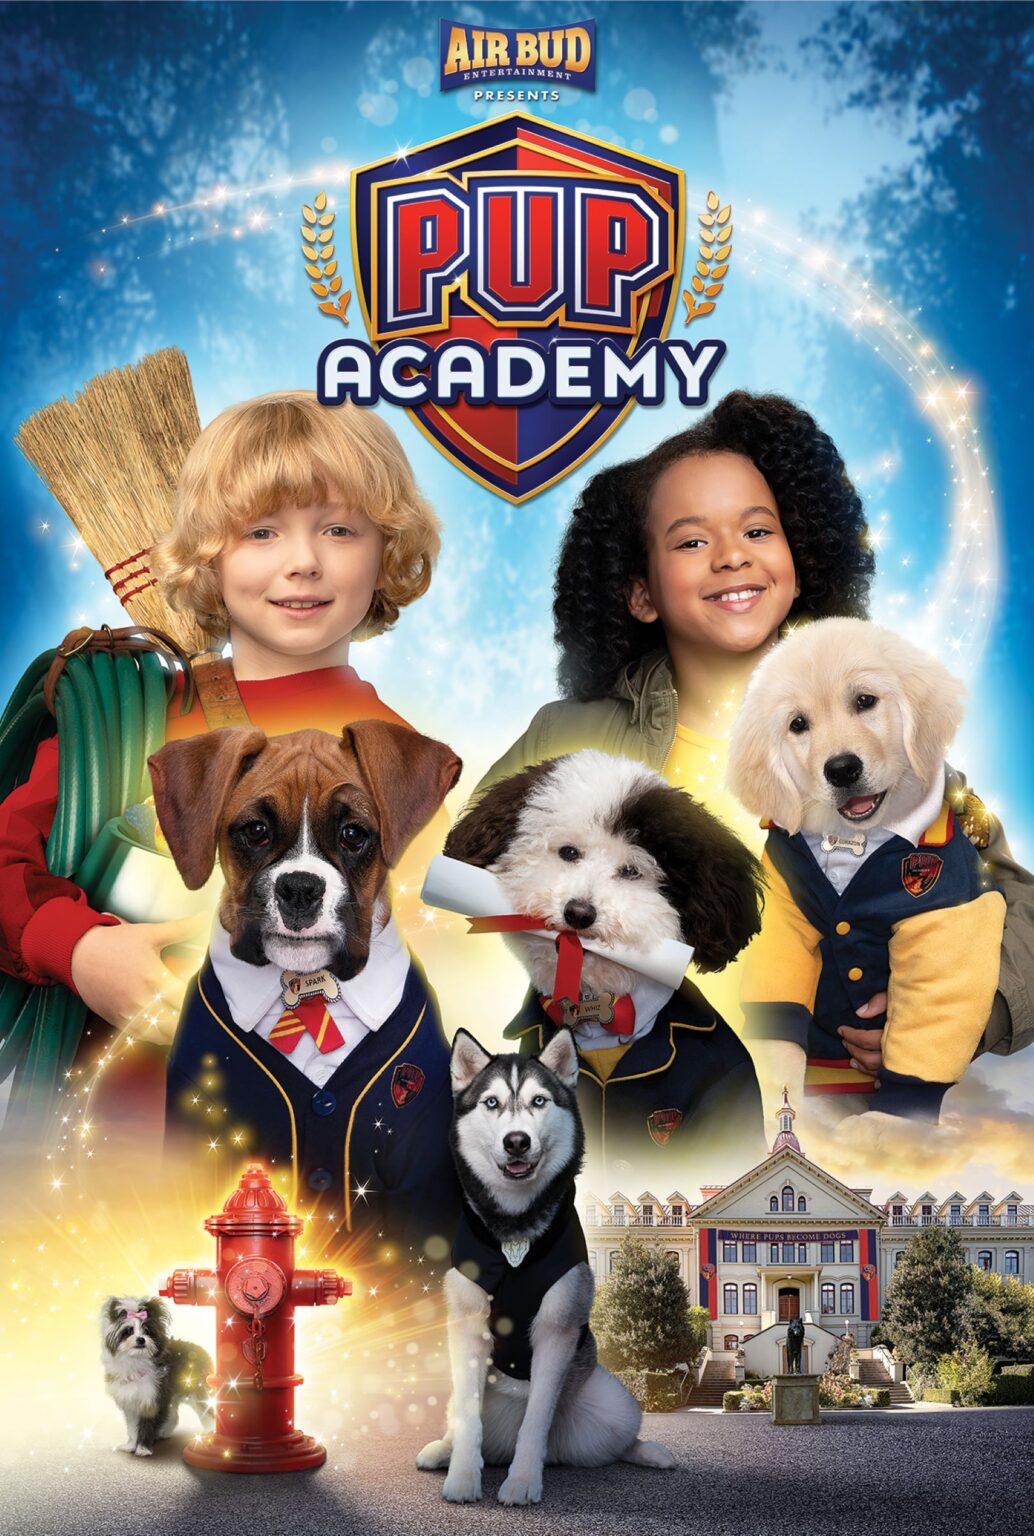 'Pup Academy' is a show about the bond between human and pup. Let’s dive into the reasons 'Pup Academy' should land on your watchlist.